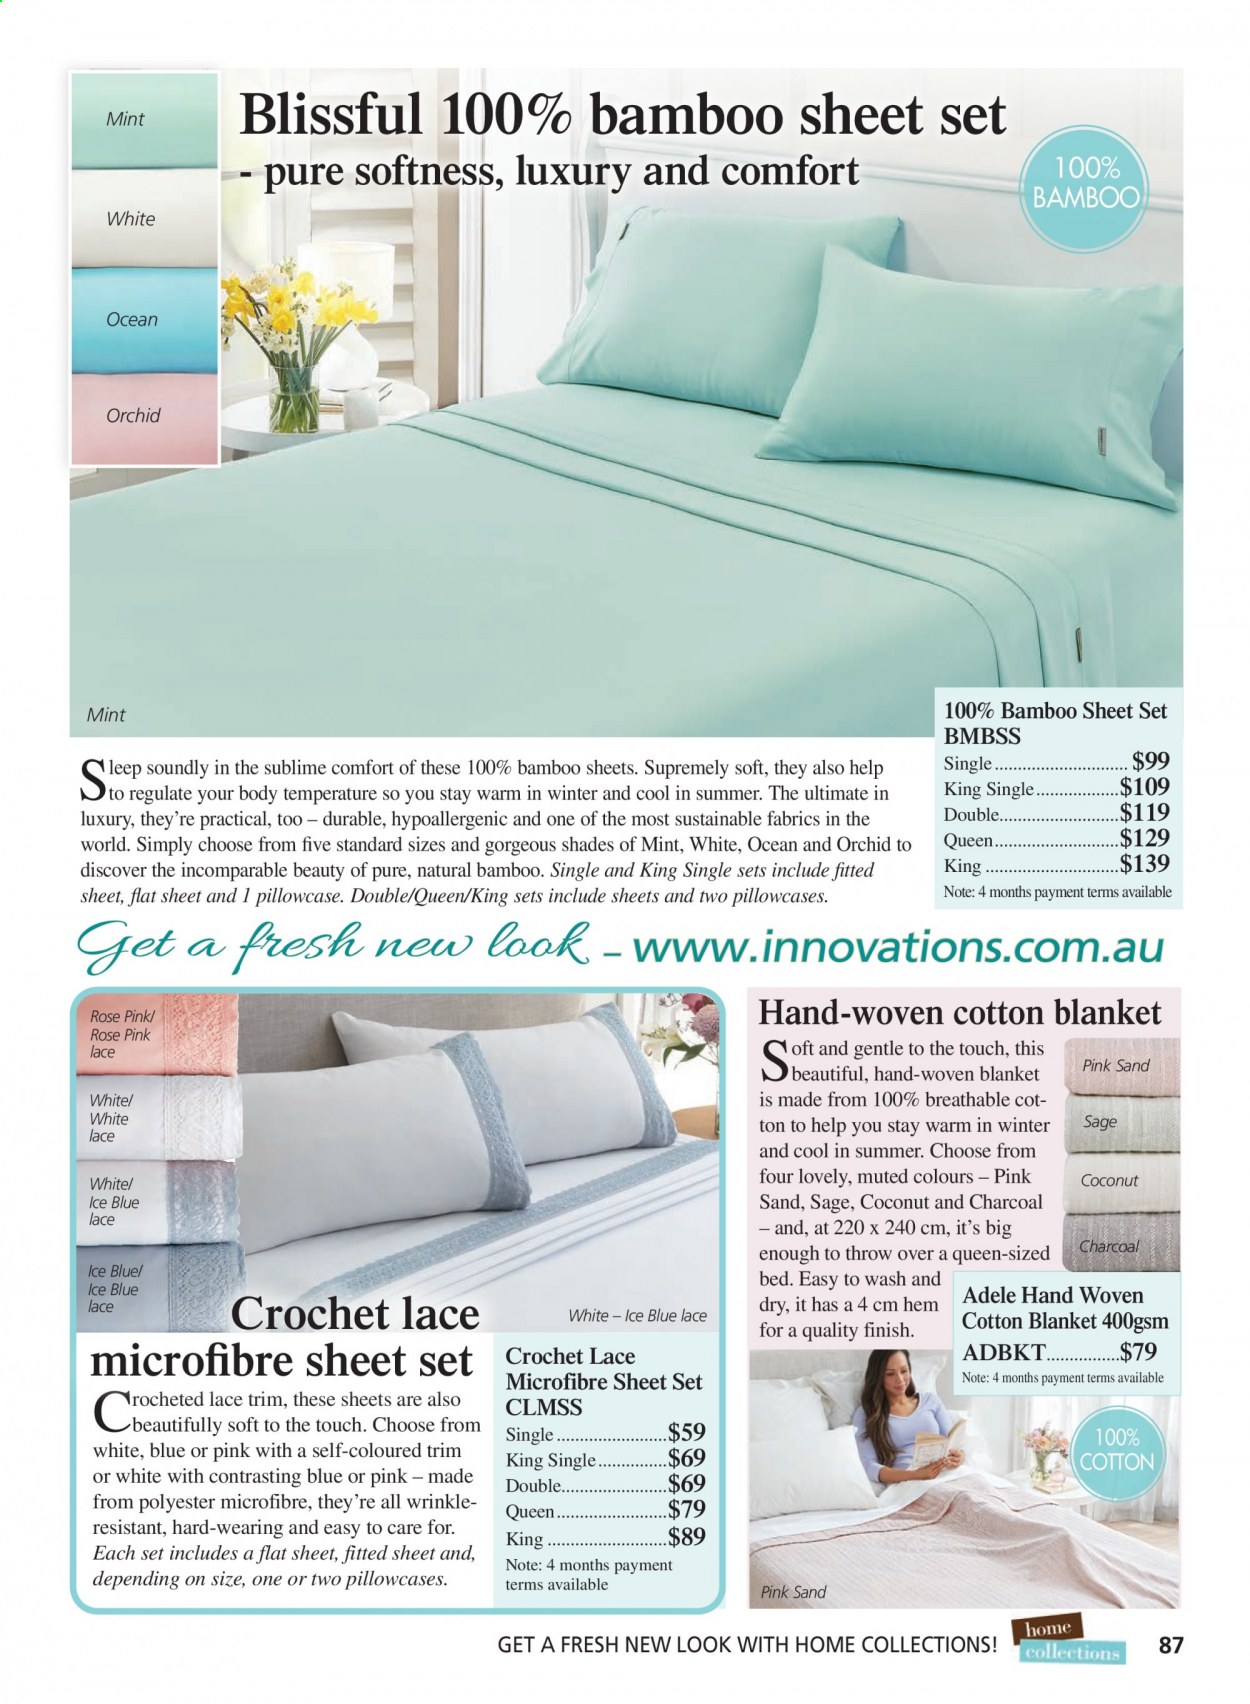 thumbnail - Innovations Catalogue - Sales products - blanket, pillowcase. Page 87.